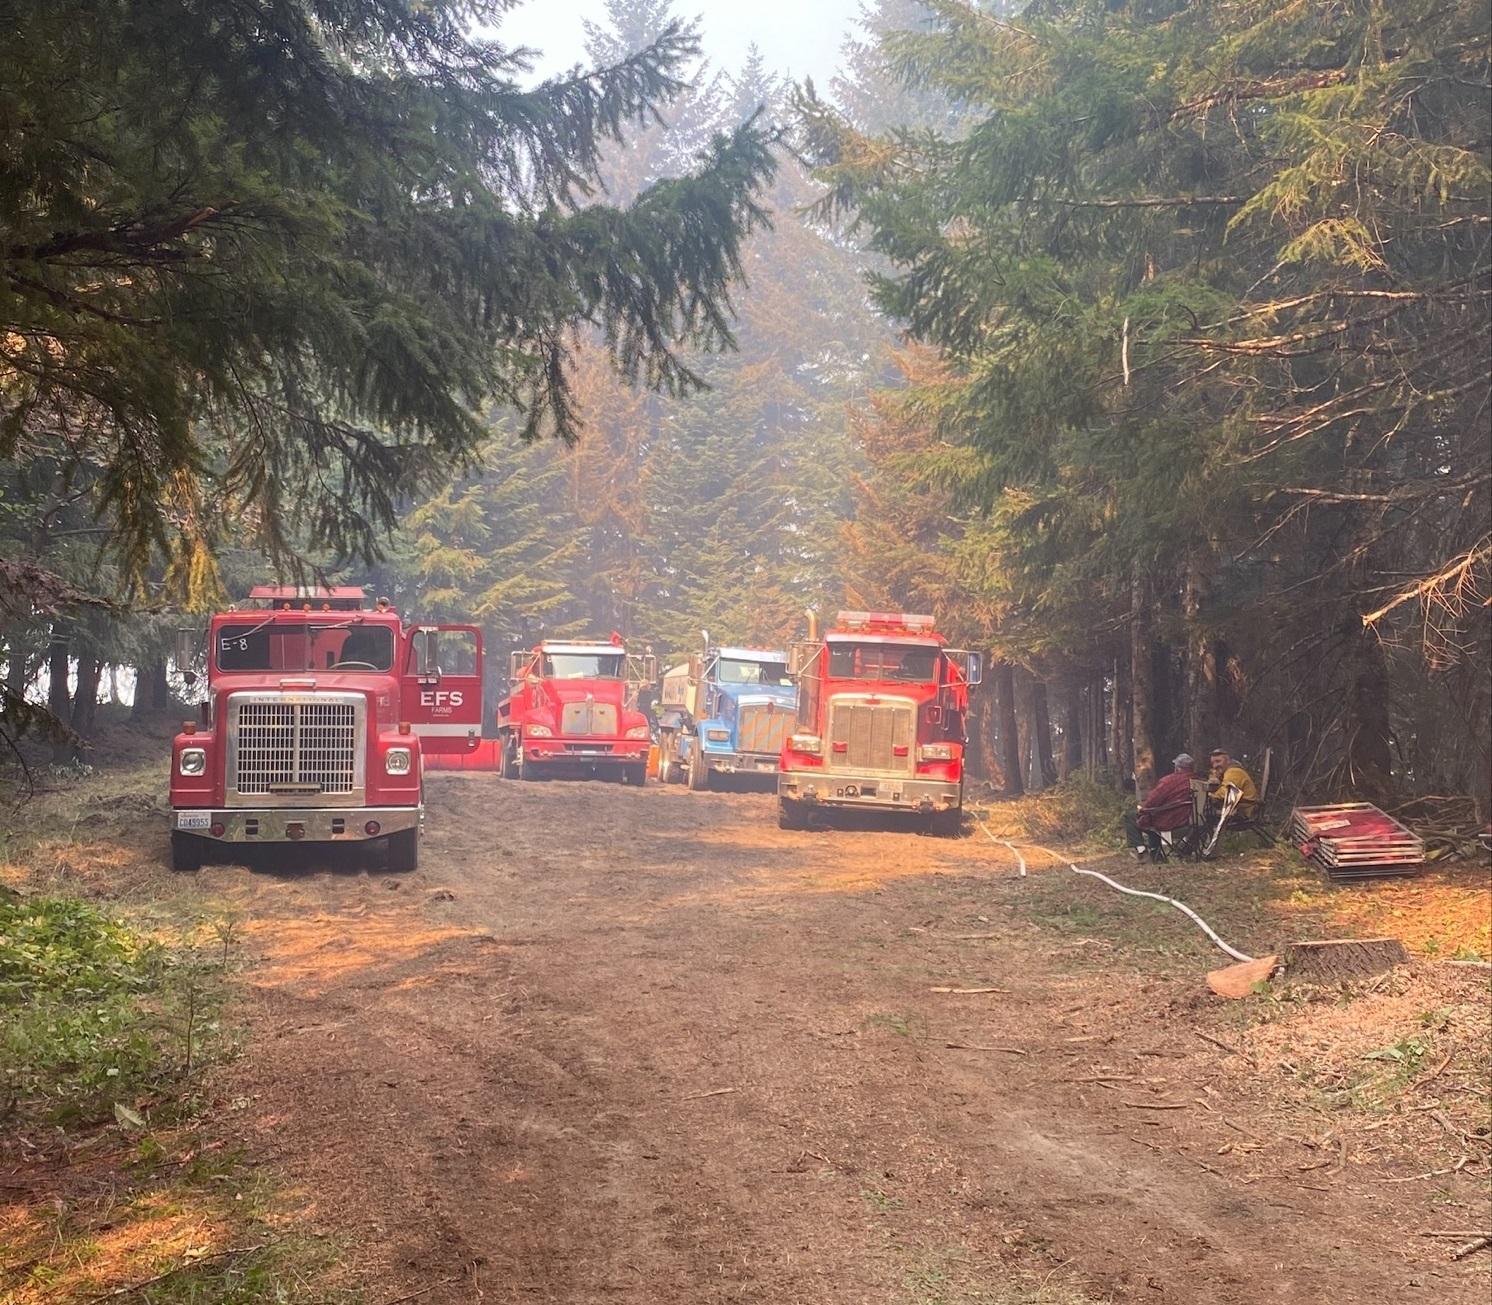 large fire engines on a unpved forest road on a cool foggy and smoky morning ni a forested area.